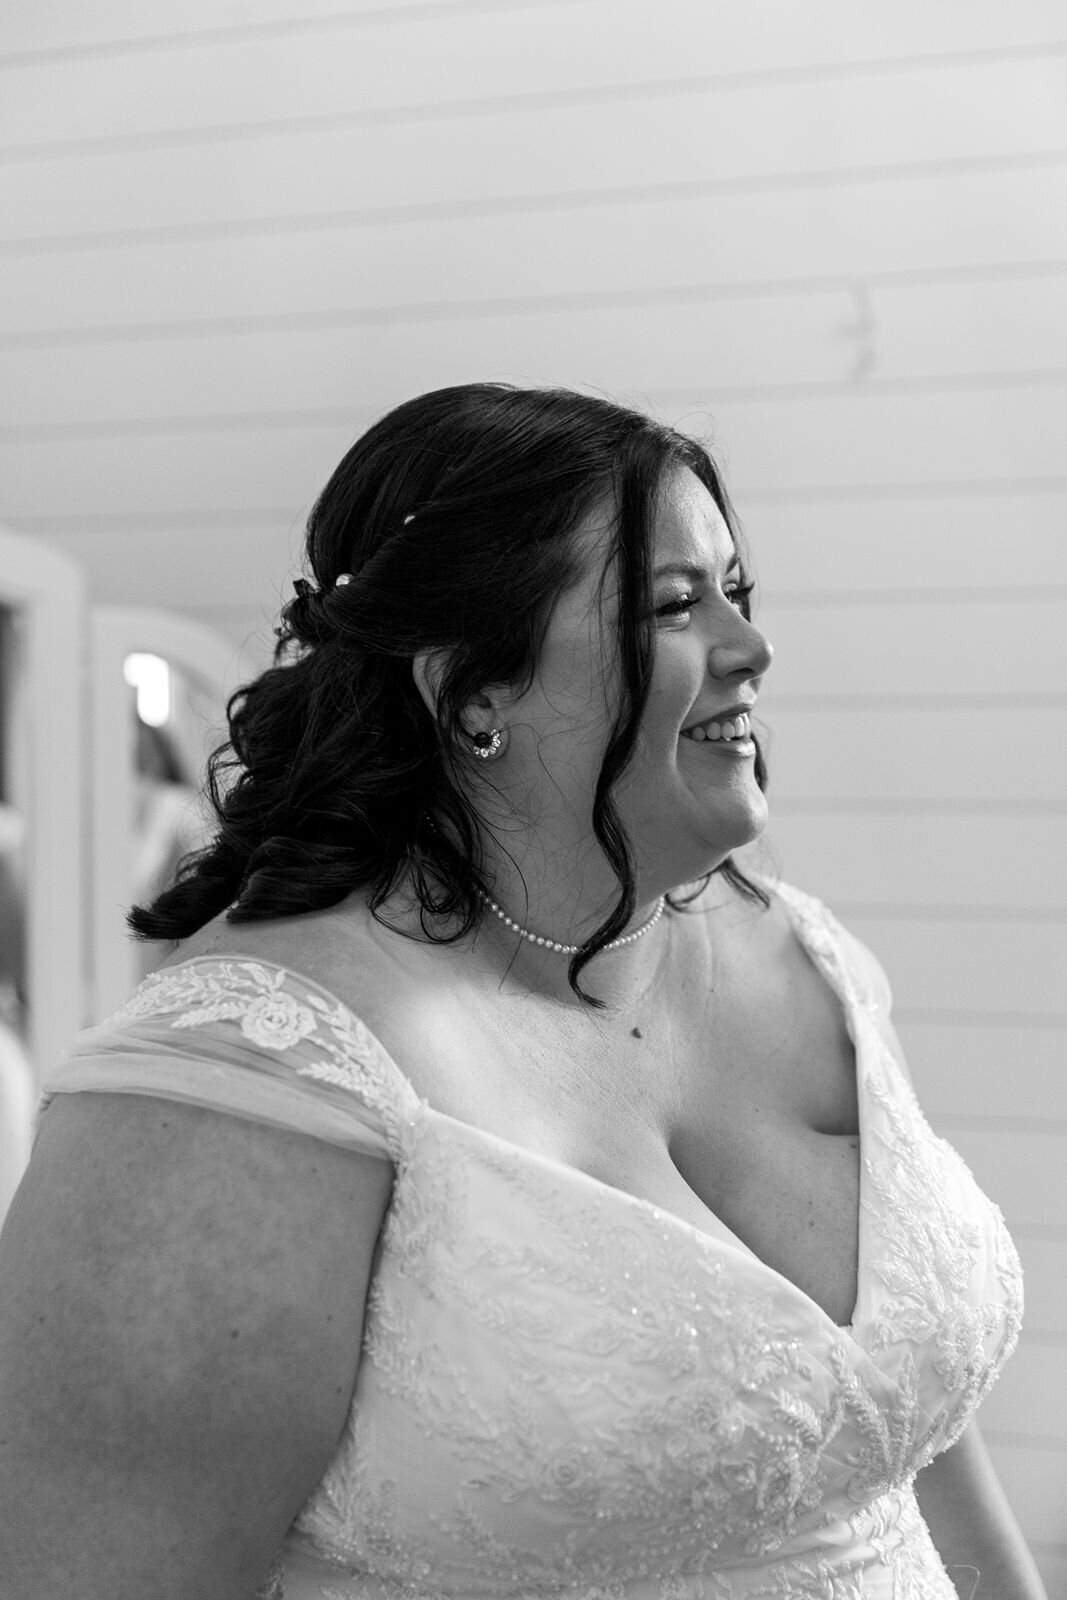 candid moment of the bride smiling and laughing